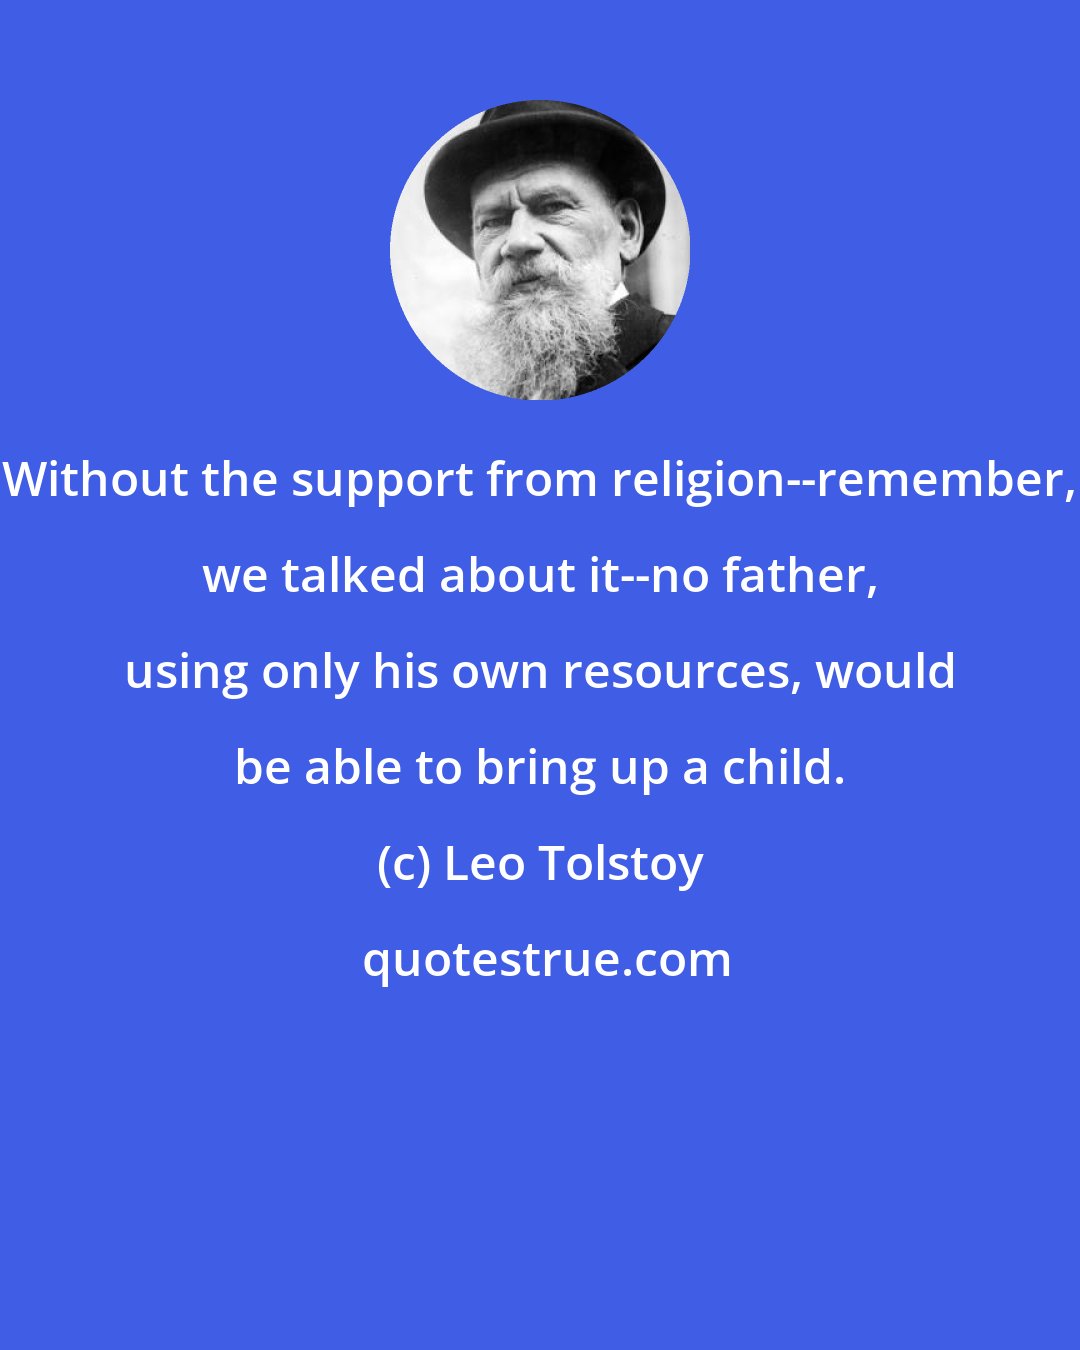 Leo Tolstoy: Without the support from religion--remember, we talked about it--no father, using only his own resources, would be able to bring up a child.